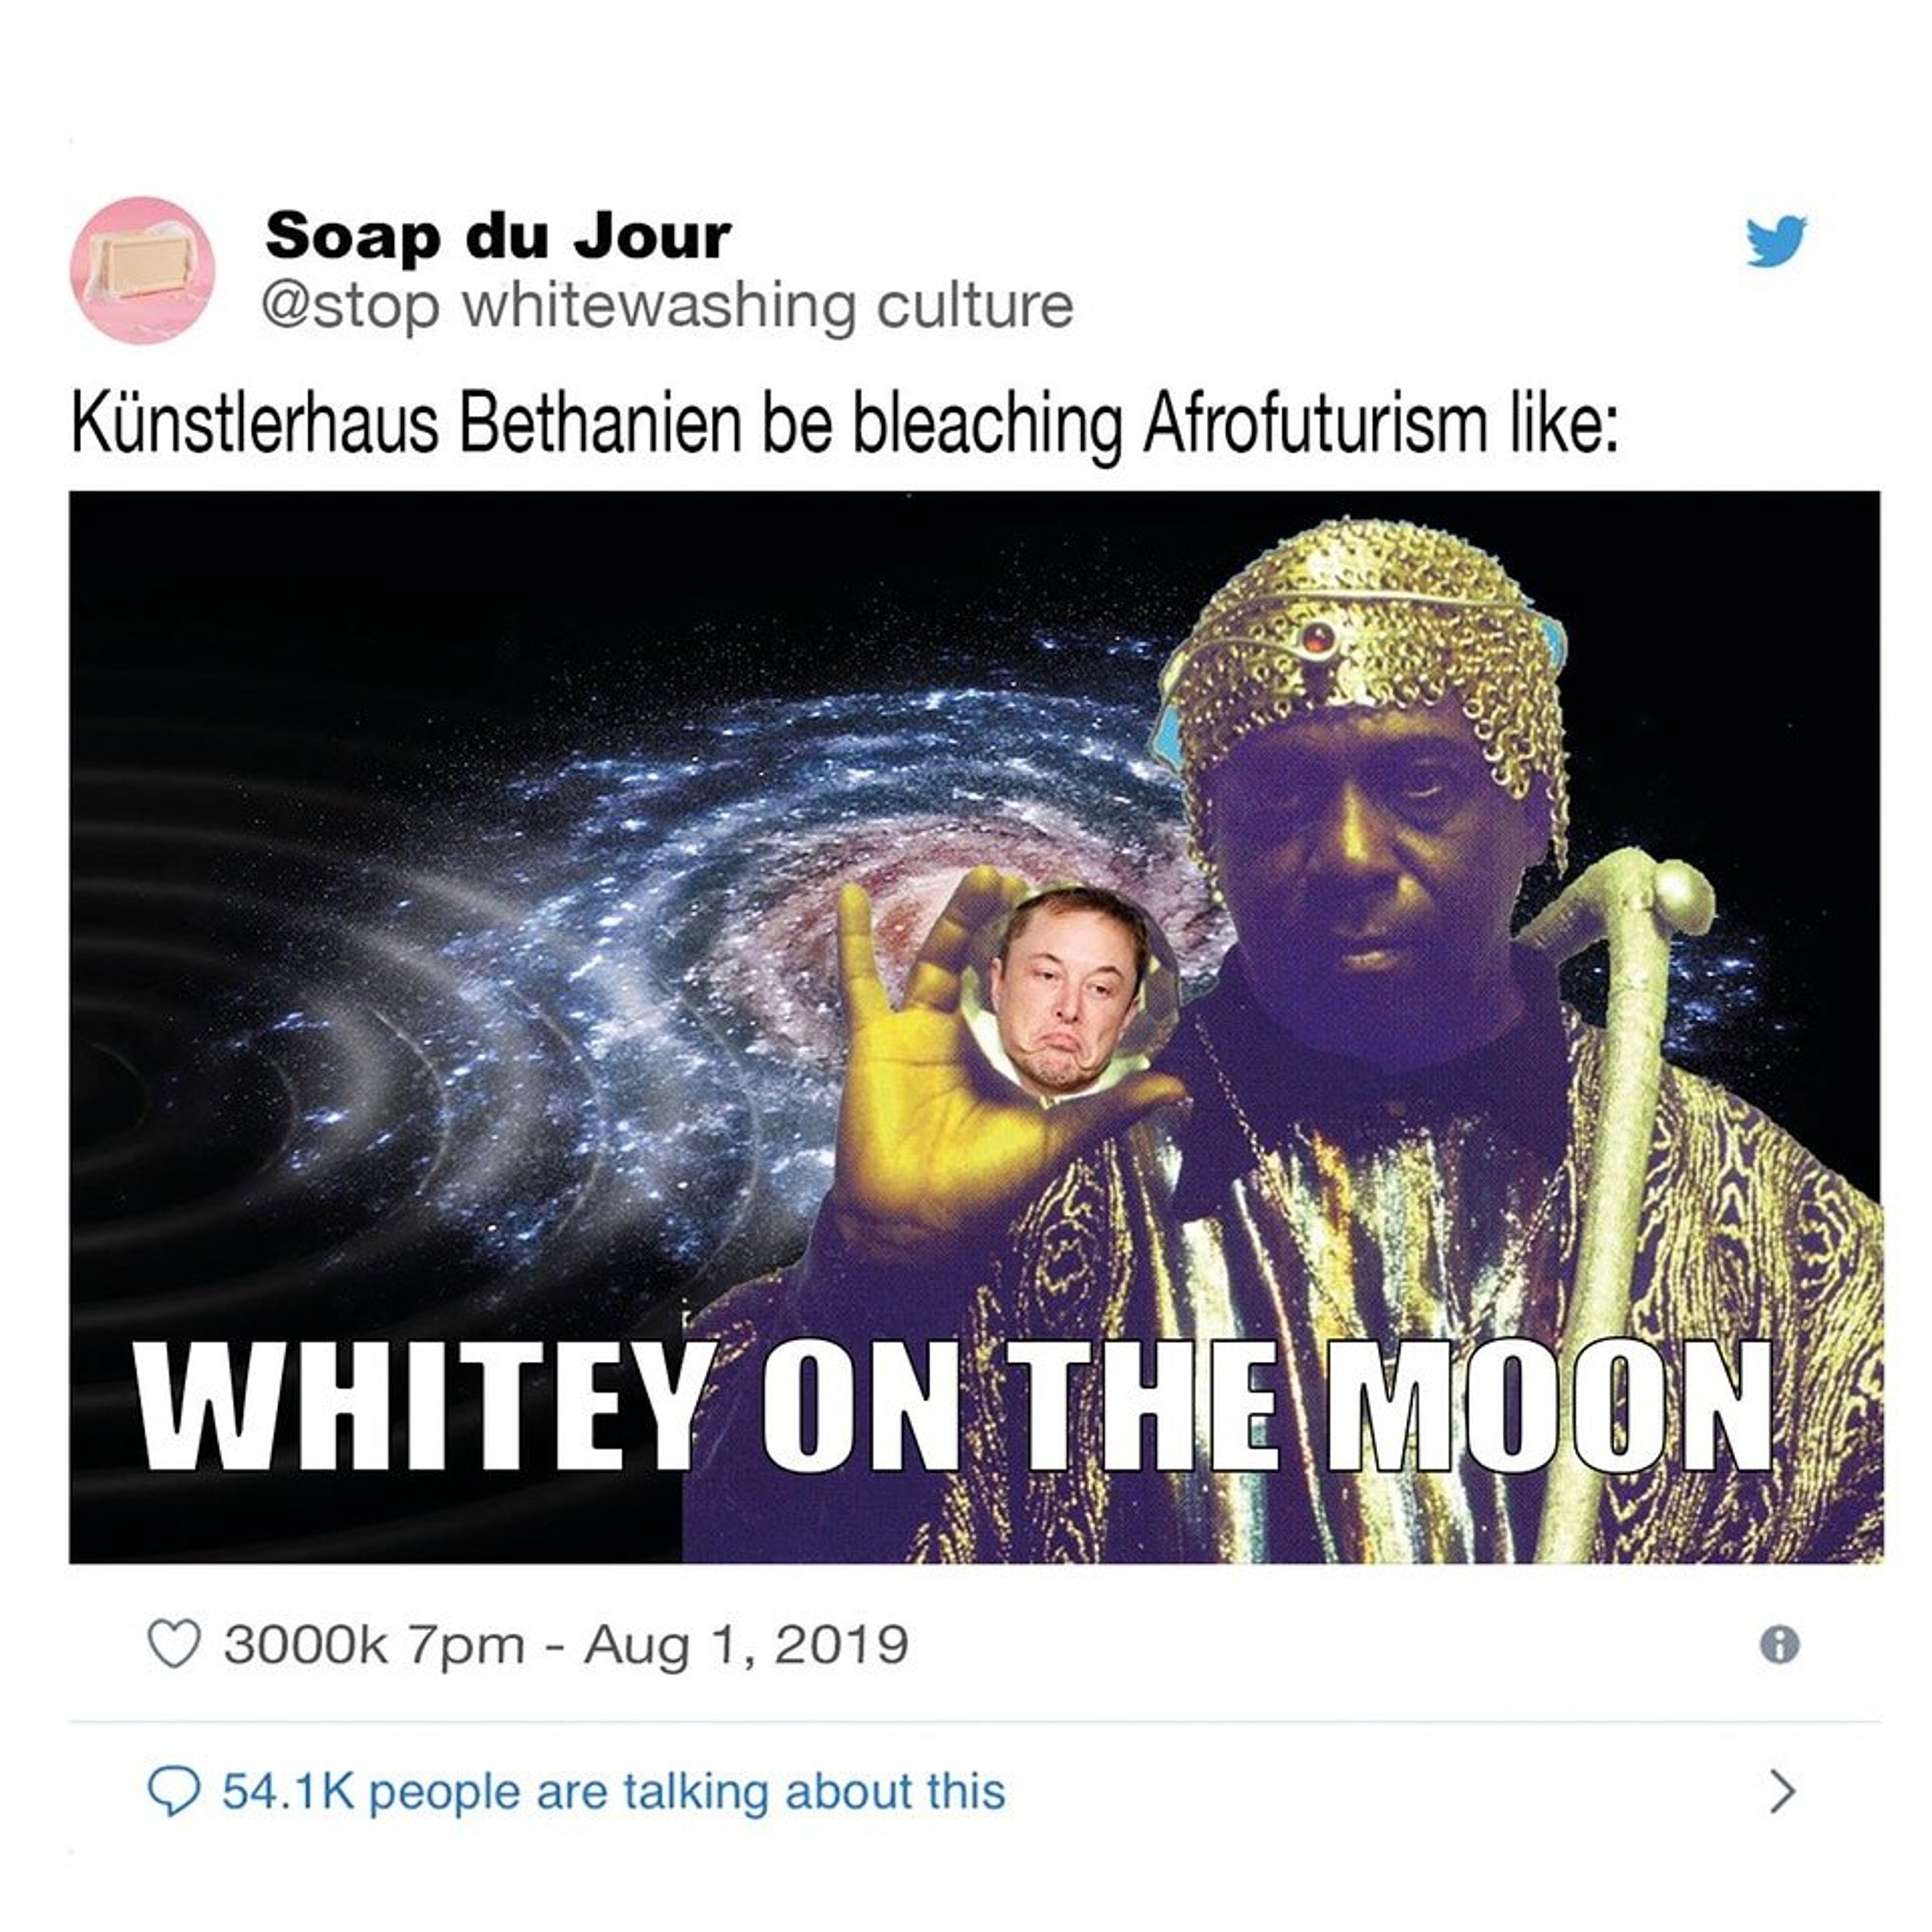 Soap du Jour's Twitter Post about a Afrofuturism exhibition which did not feature any African artists